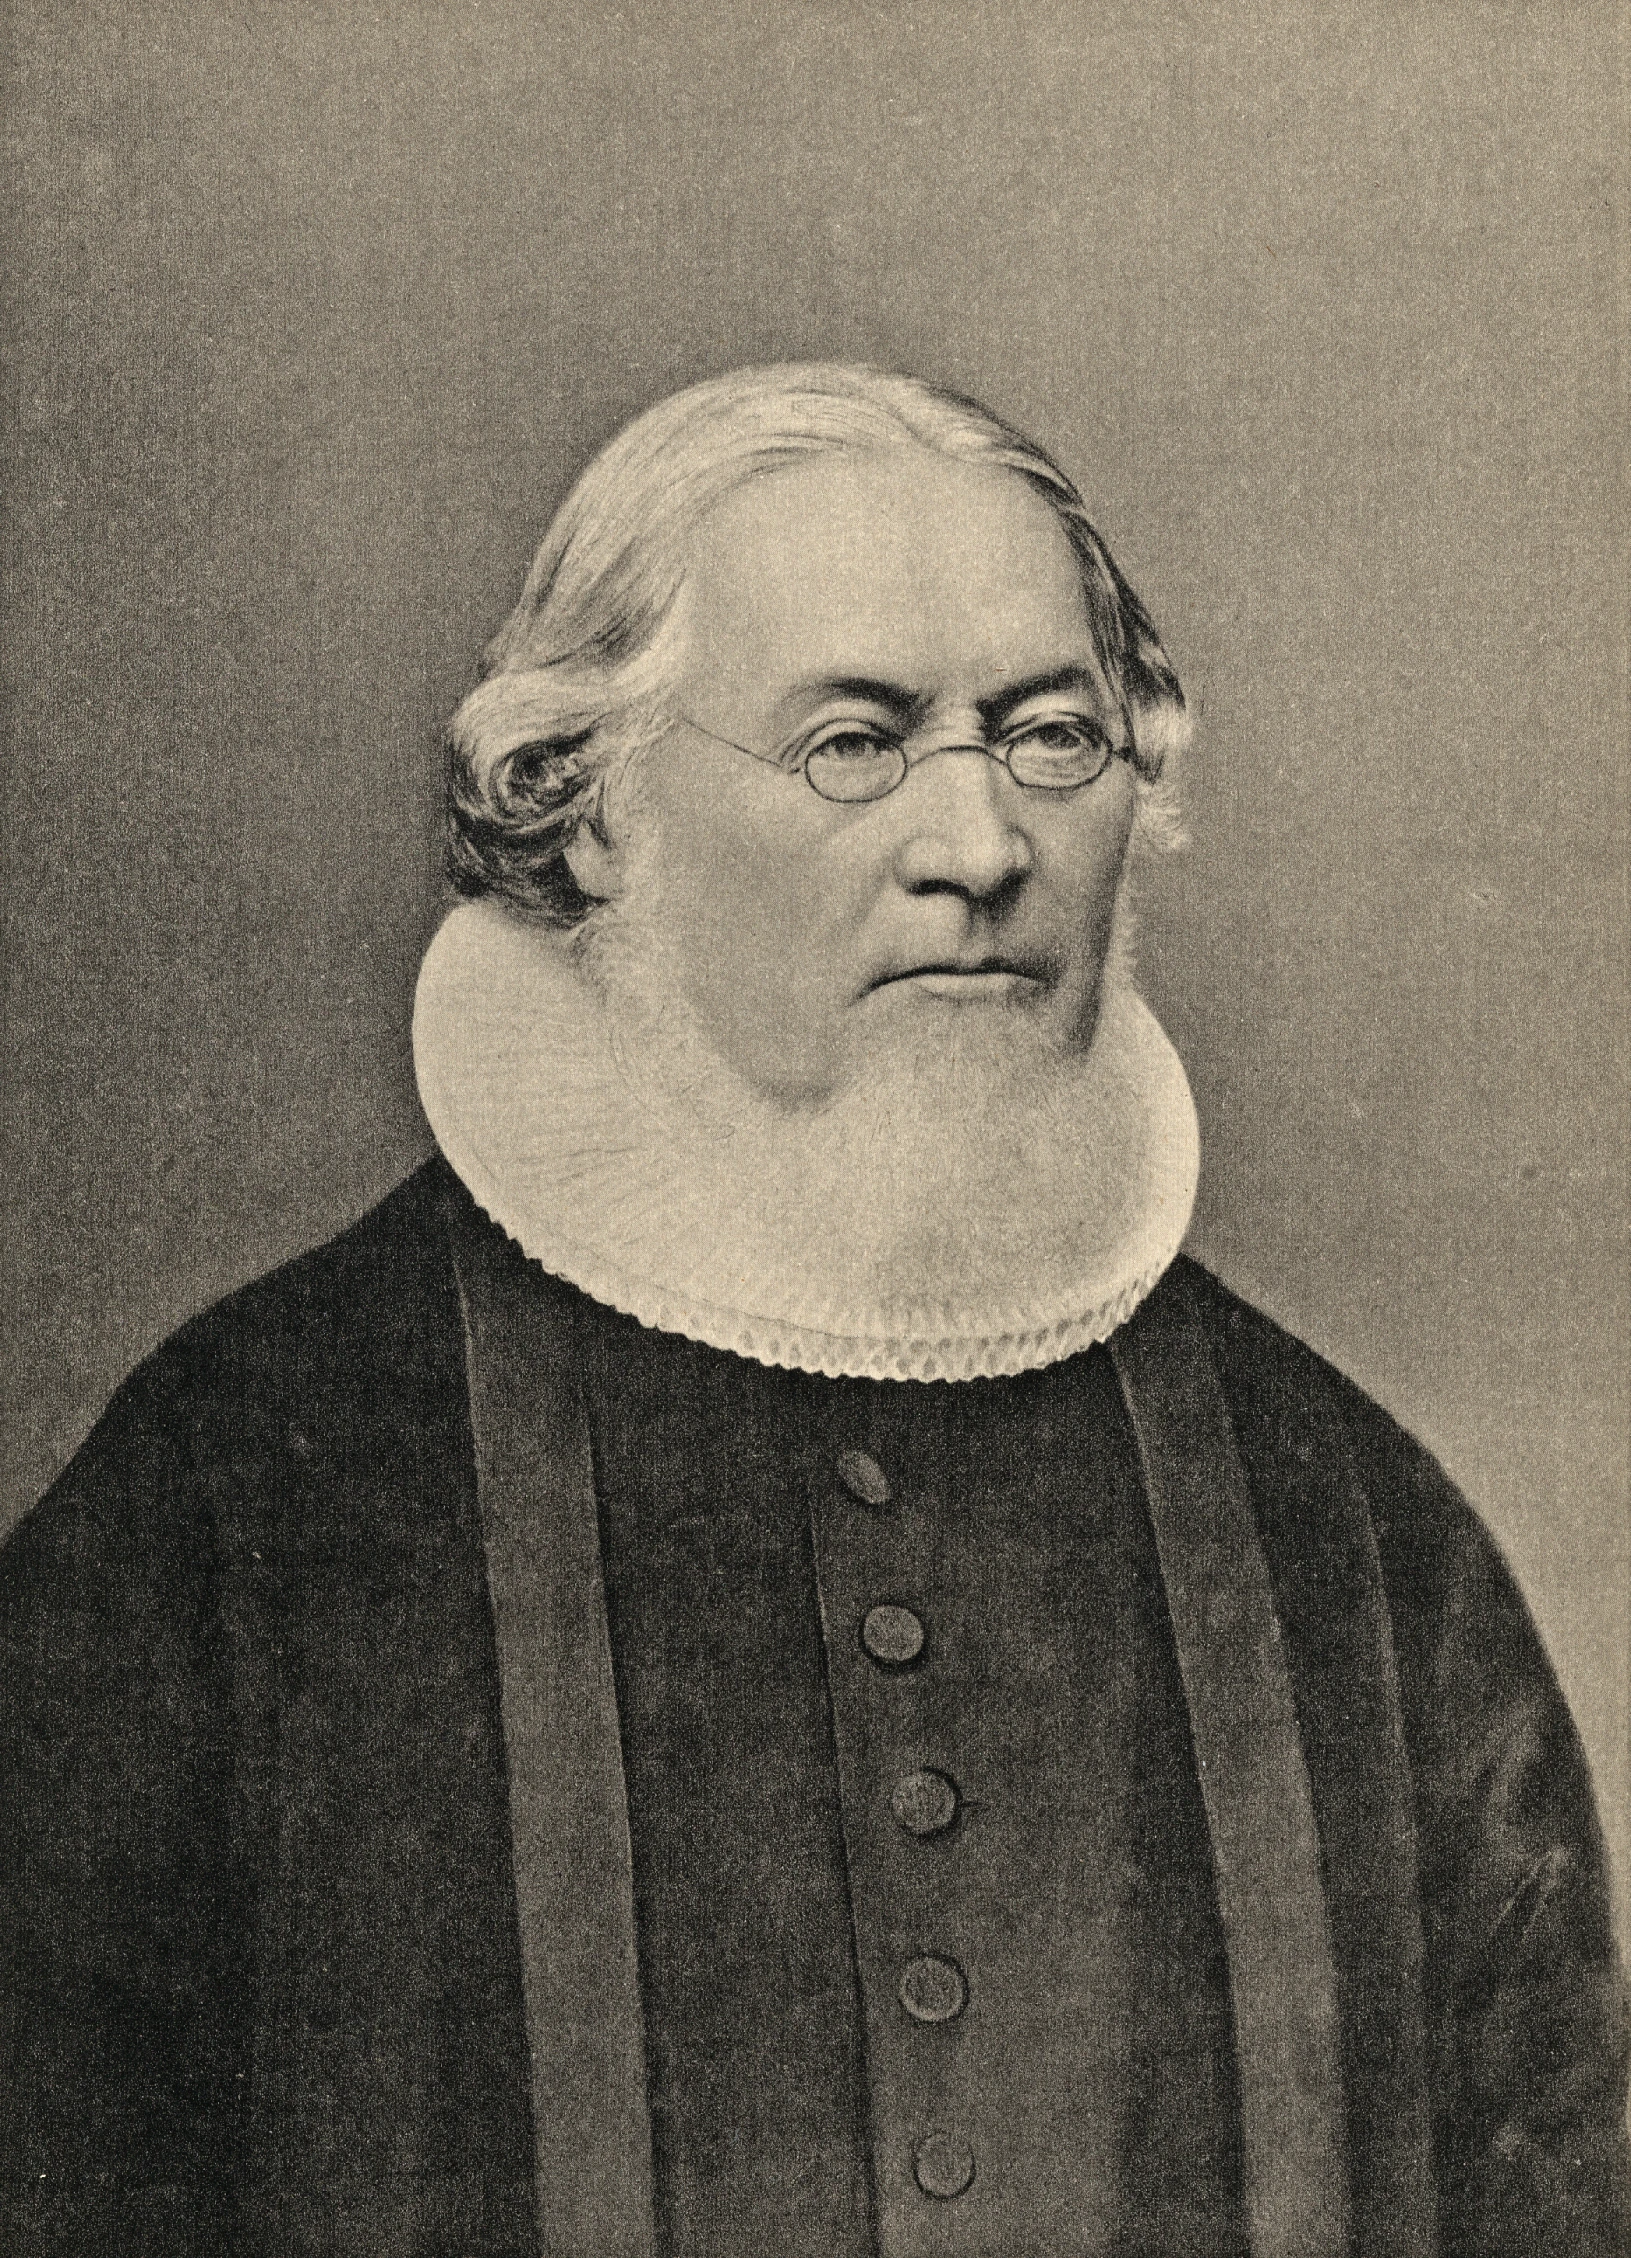 black and white drawing of an old man in a priest's outfit